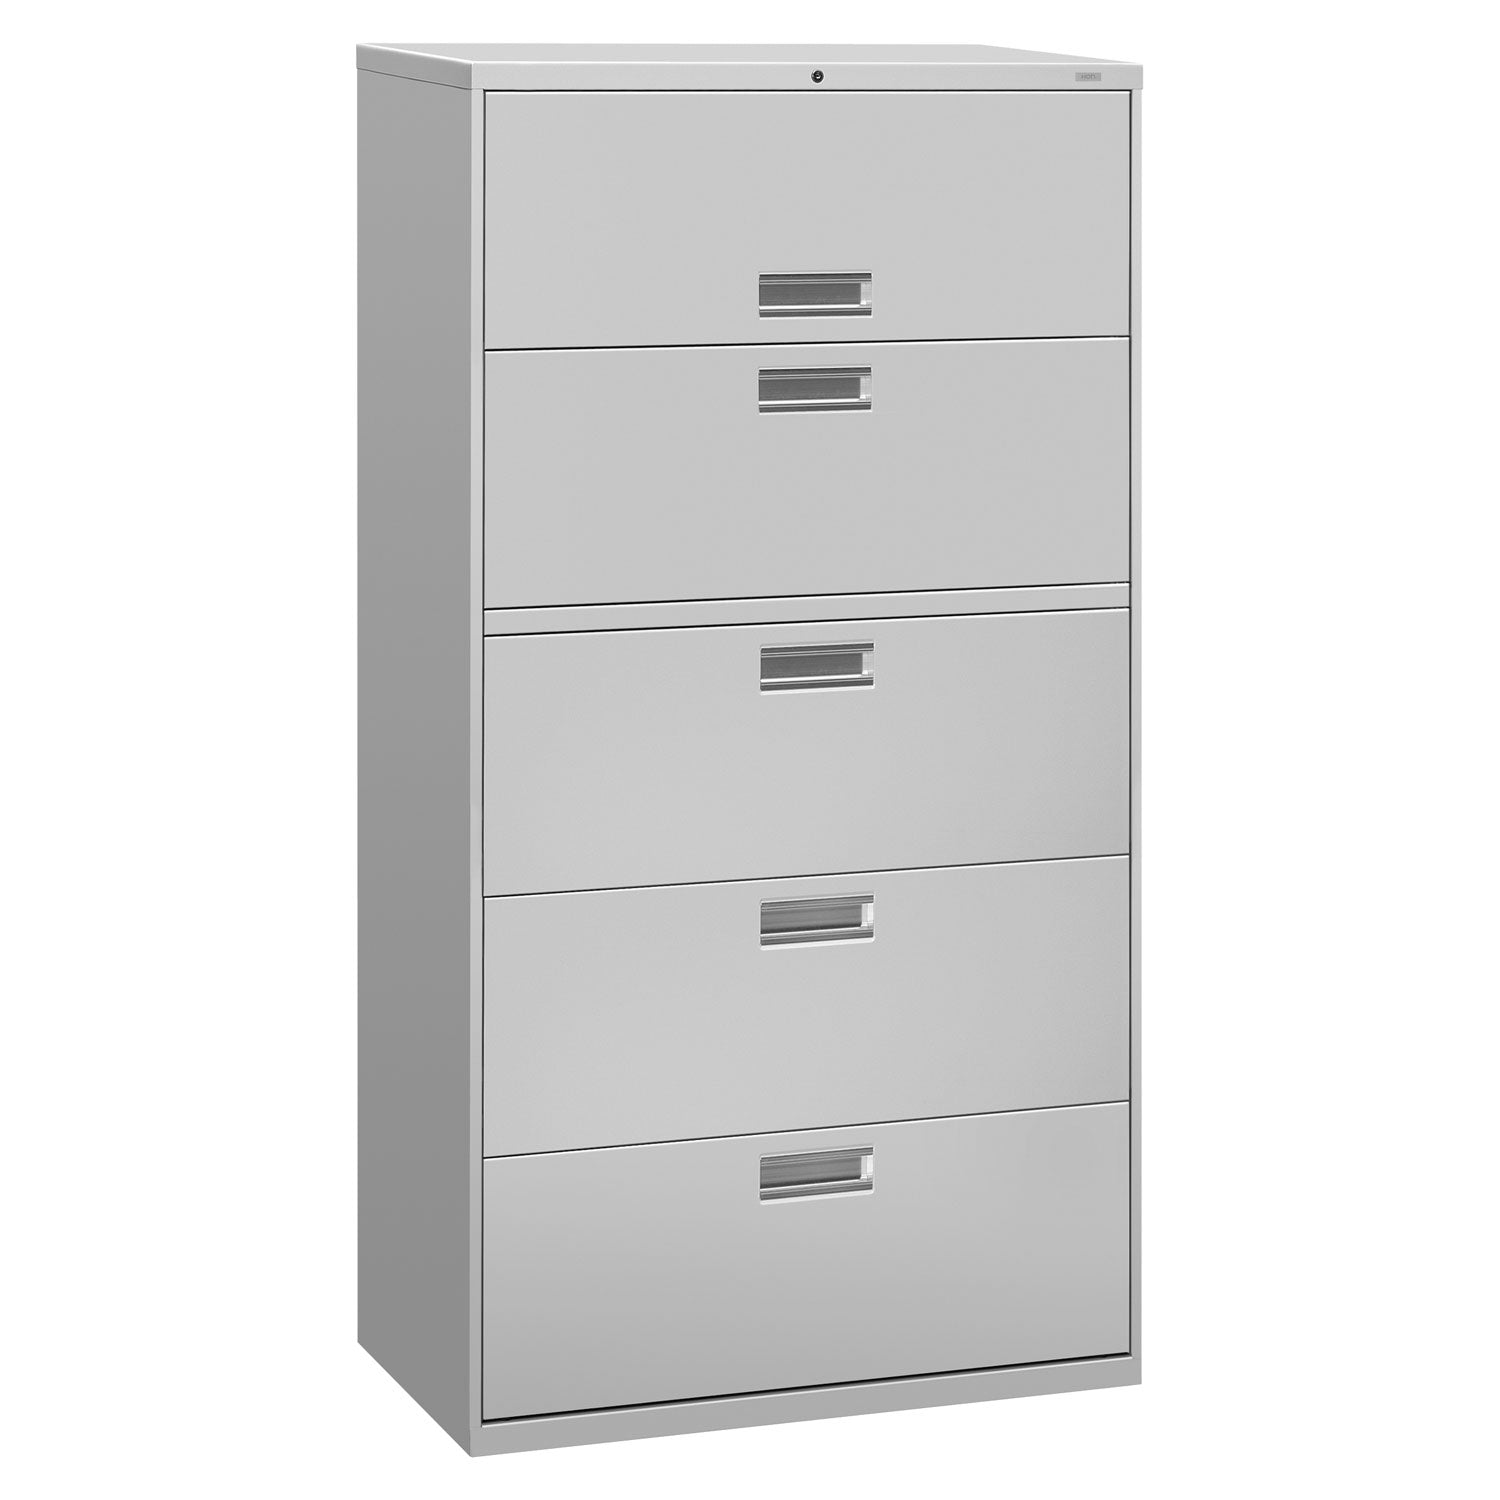 Brigade 600 Series Lateral File, 4 Legal/Letter-Size File Drawers, 1 Roll-Out File Shelf, Light Gray, 36" x 18" x 64.25 - 